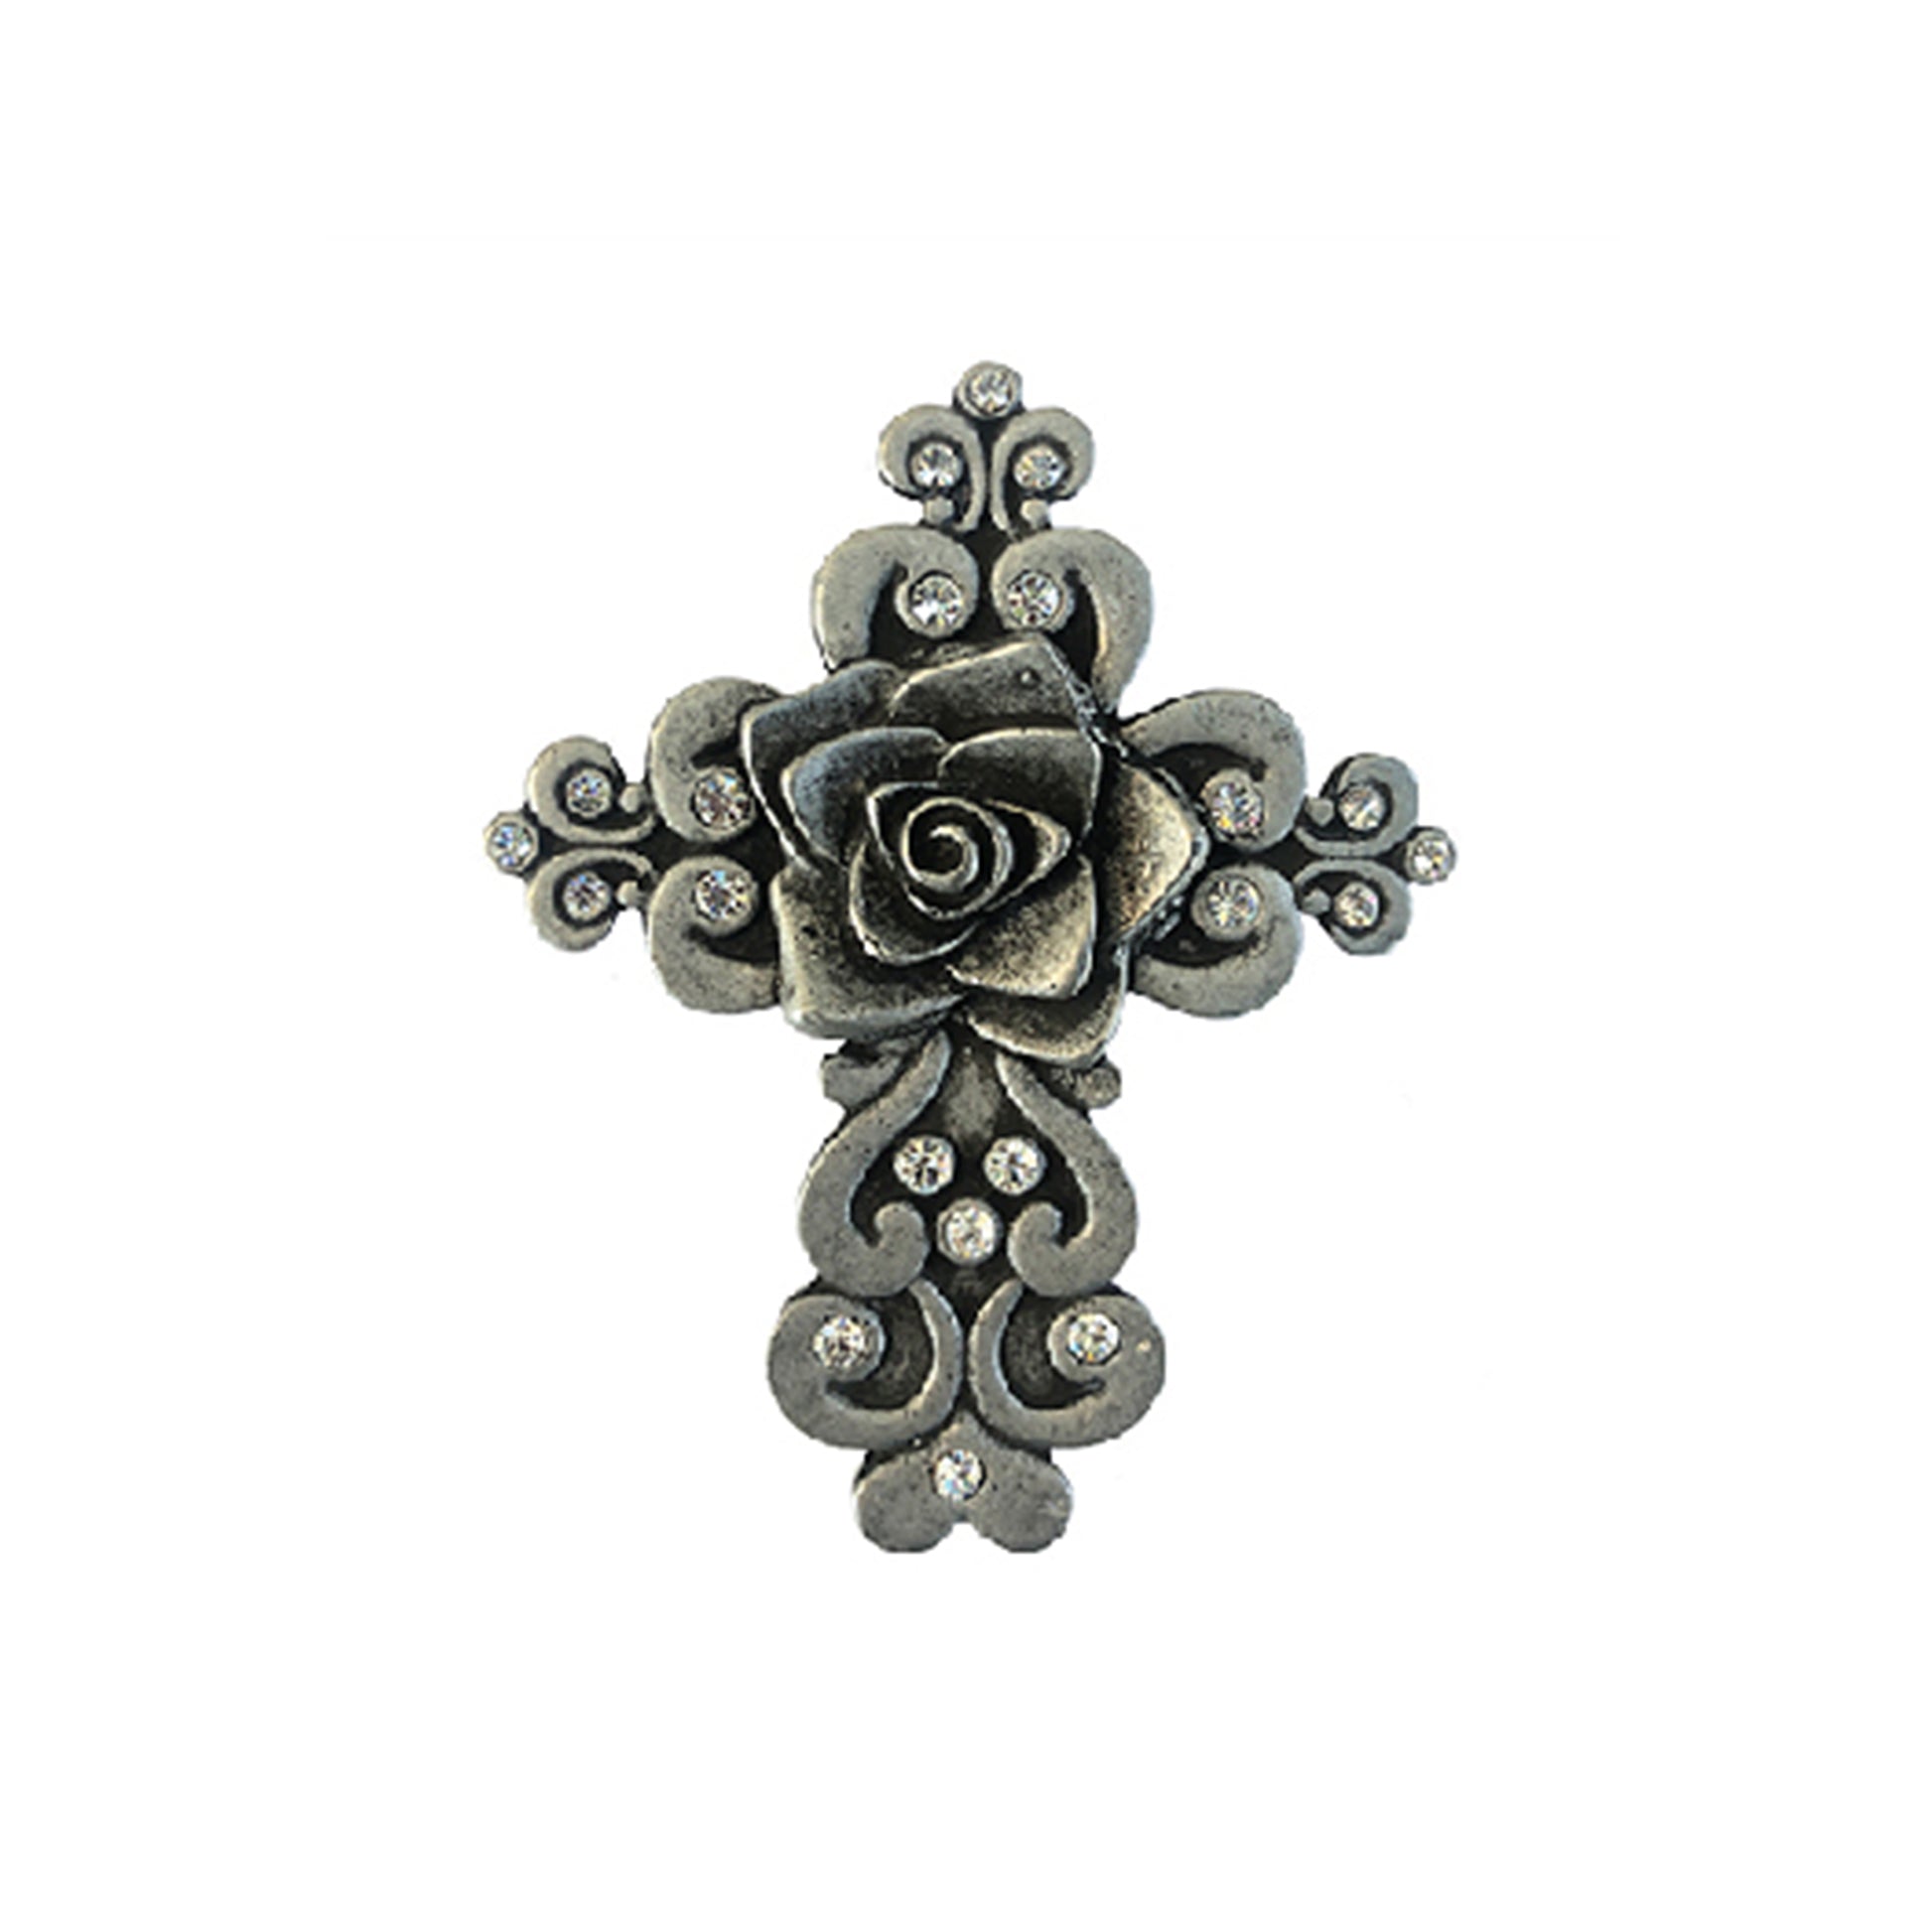 3" x 3-3/4" D5 Cross concho with crystals and a center pewter rose (set of 4). 